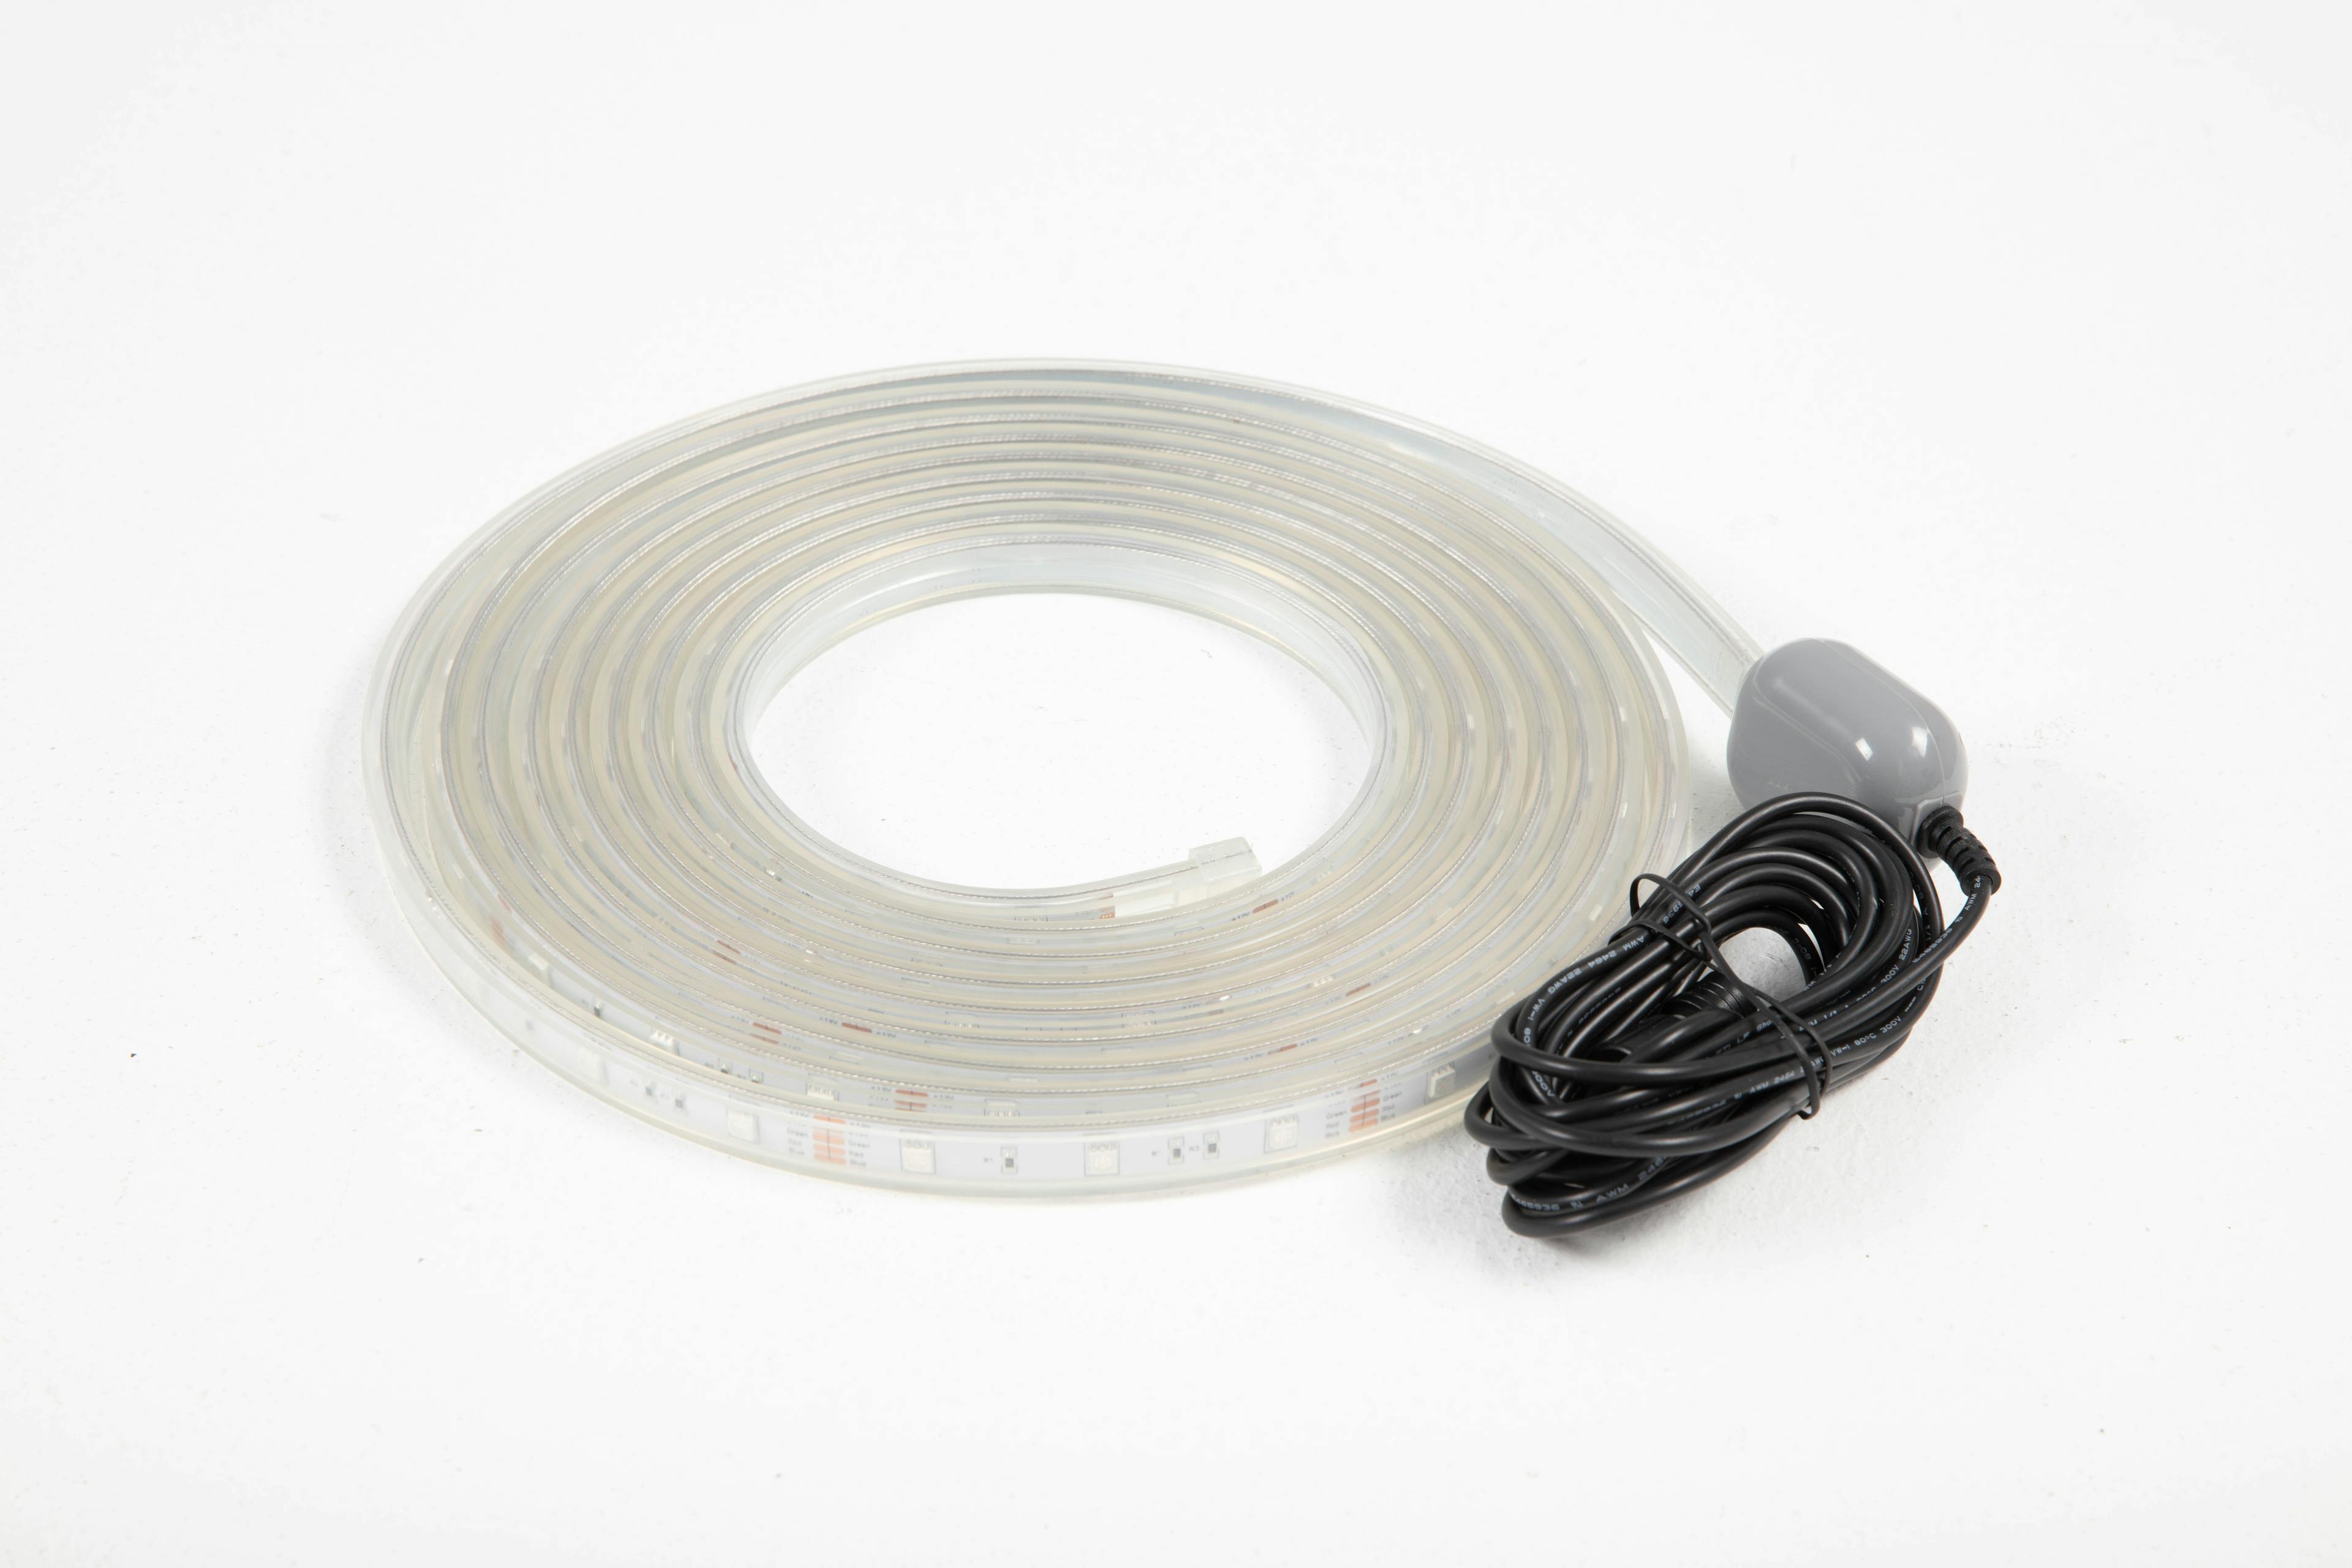 LED Strip(Including the Strip and Wire)